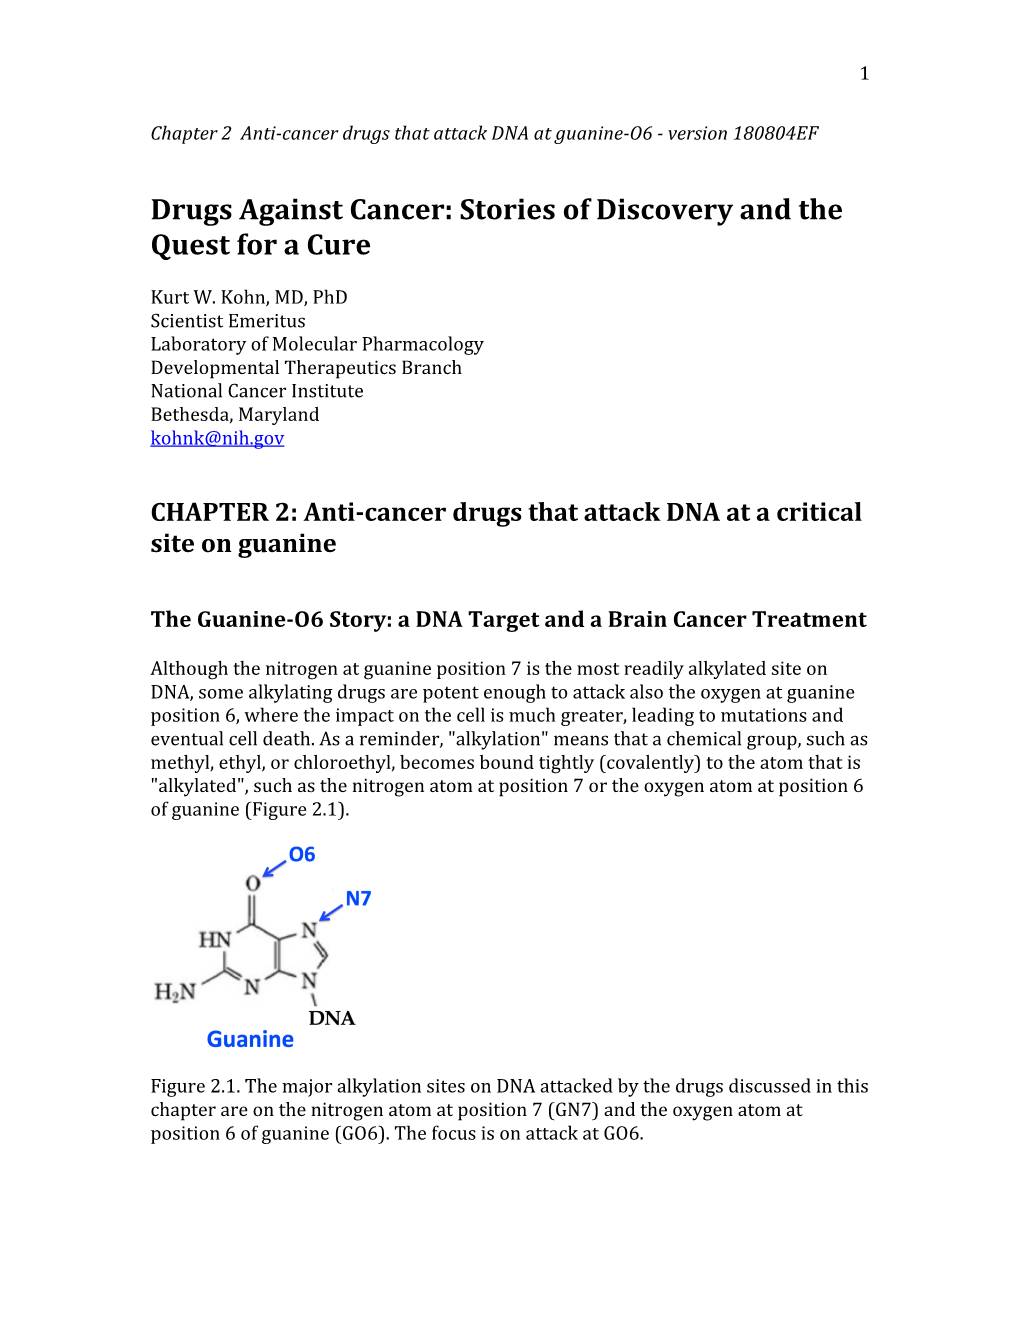 Drugs Against Cancer: Stories of Discovery and the Quest for a Cure